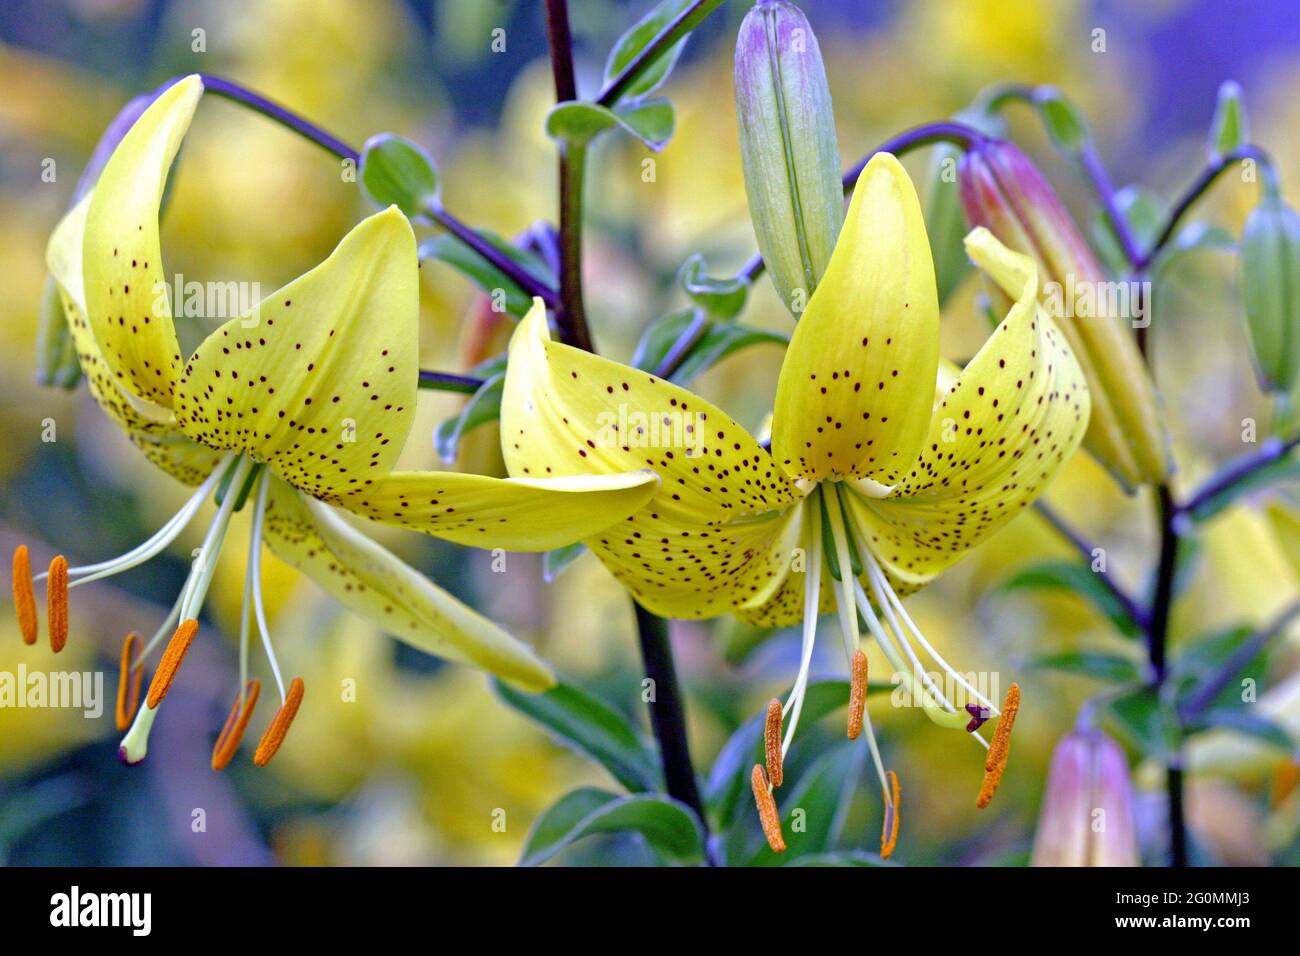 Asiatic Hybrid Lily Lilium Citronella, a yellow pendant lily with freckled recurved petals reminiscent of a 'turk's-cap' another name for this Lily Stock Photo